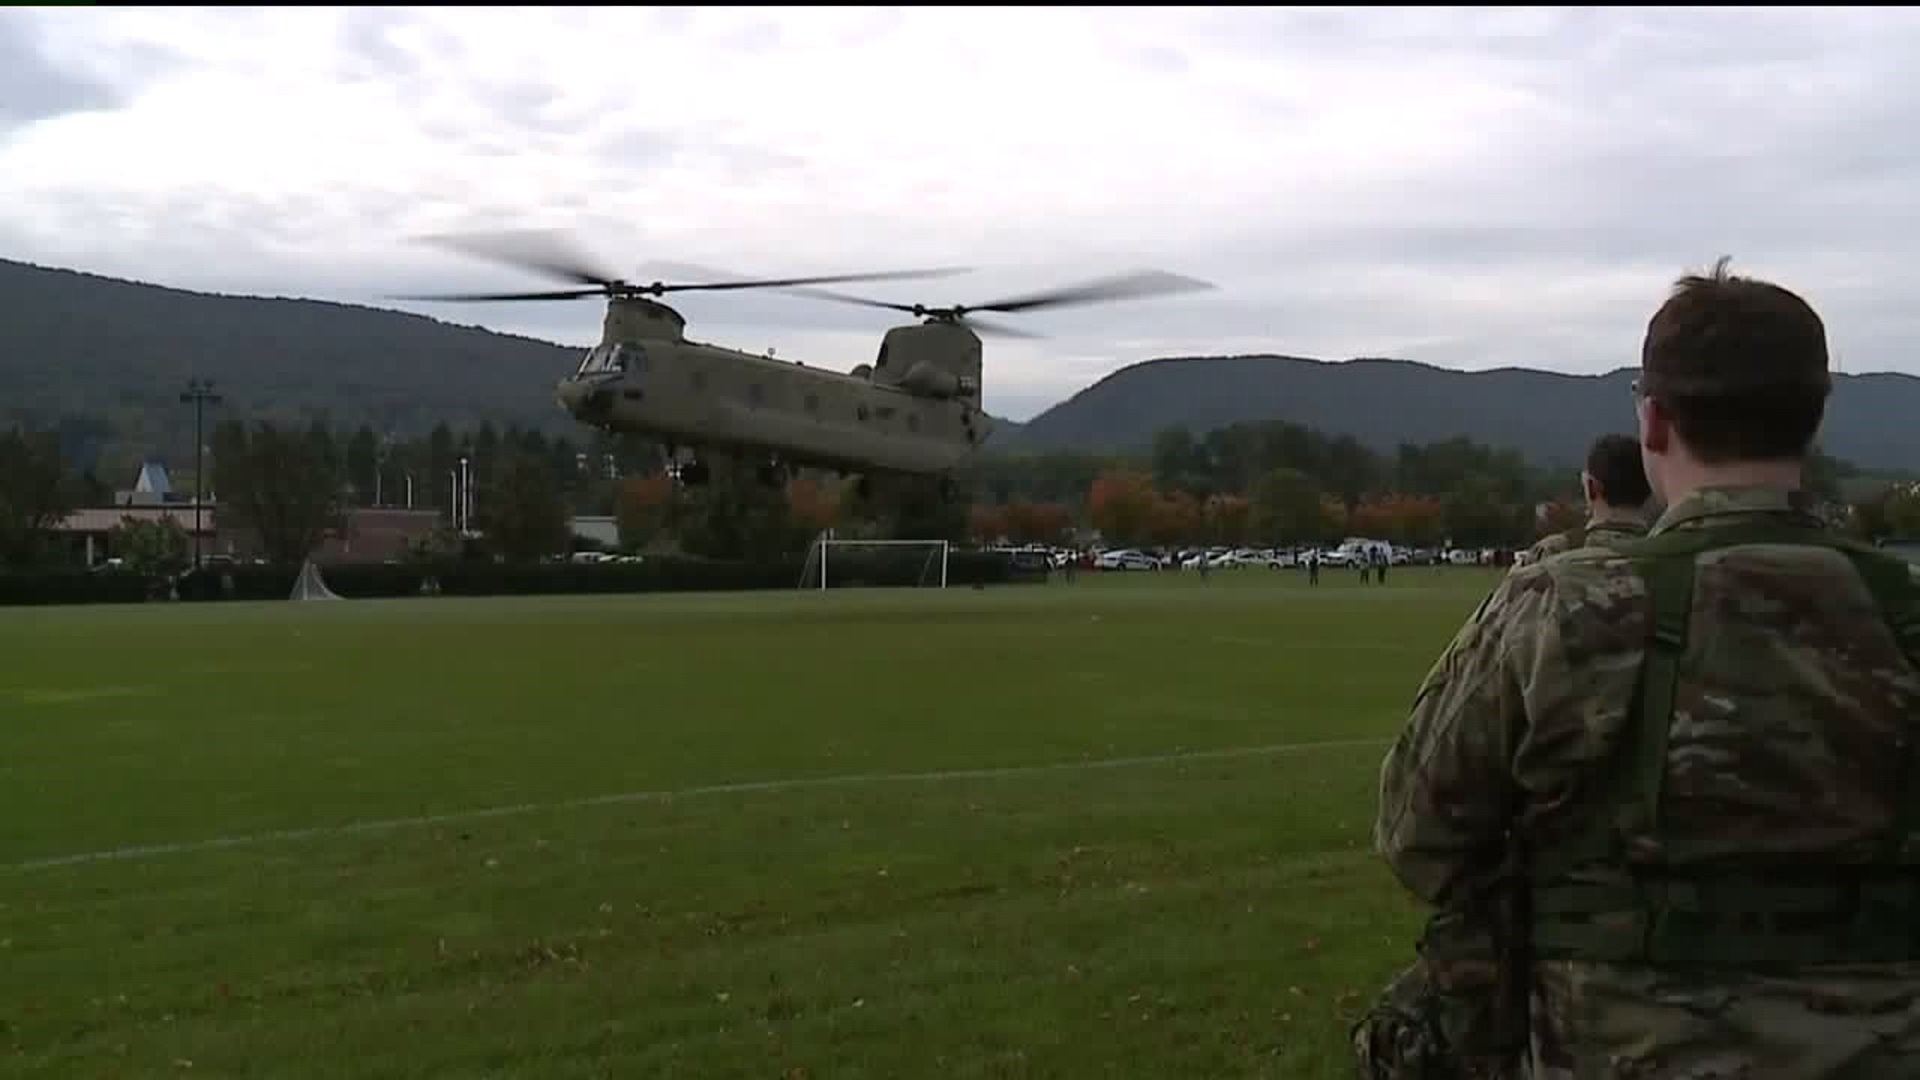 Army Helicopter Lands at Penn College to Transport ROTC Cadets